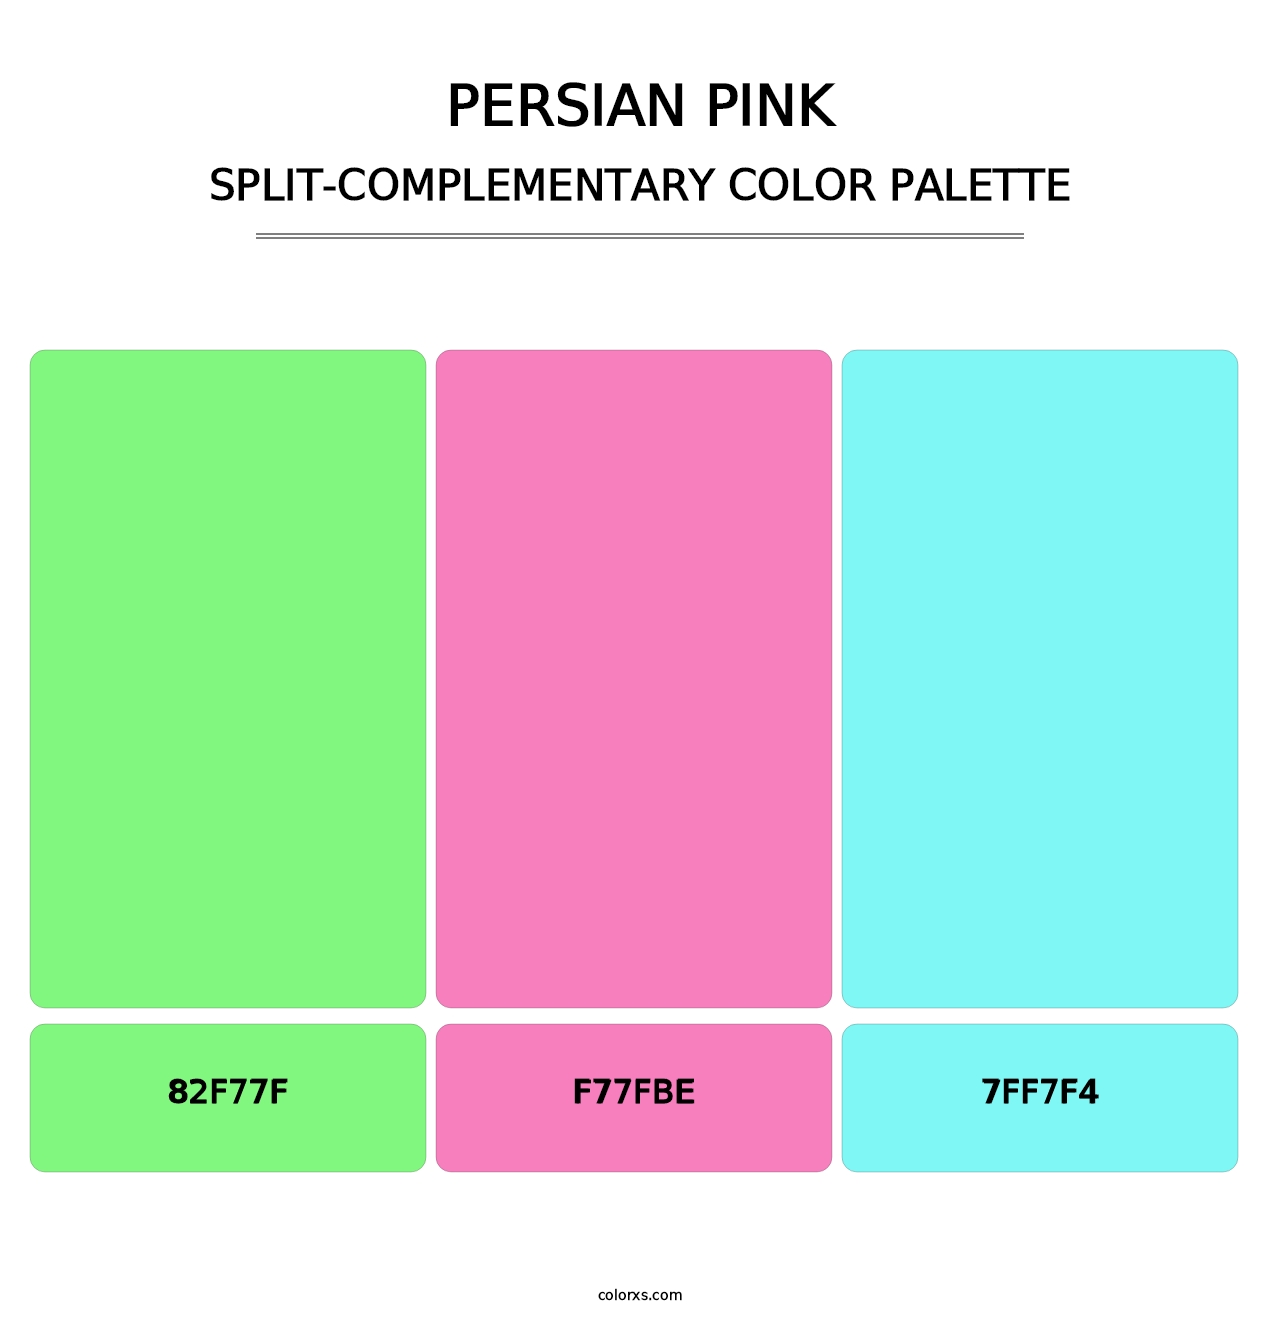 Persian Pink - Split-Complementary Color Palette